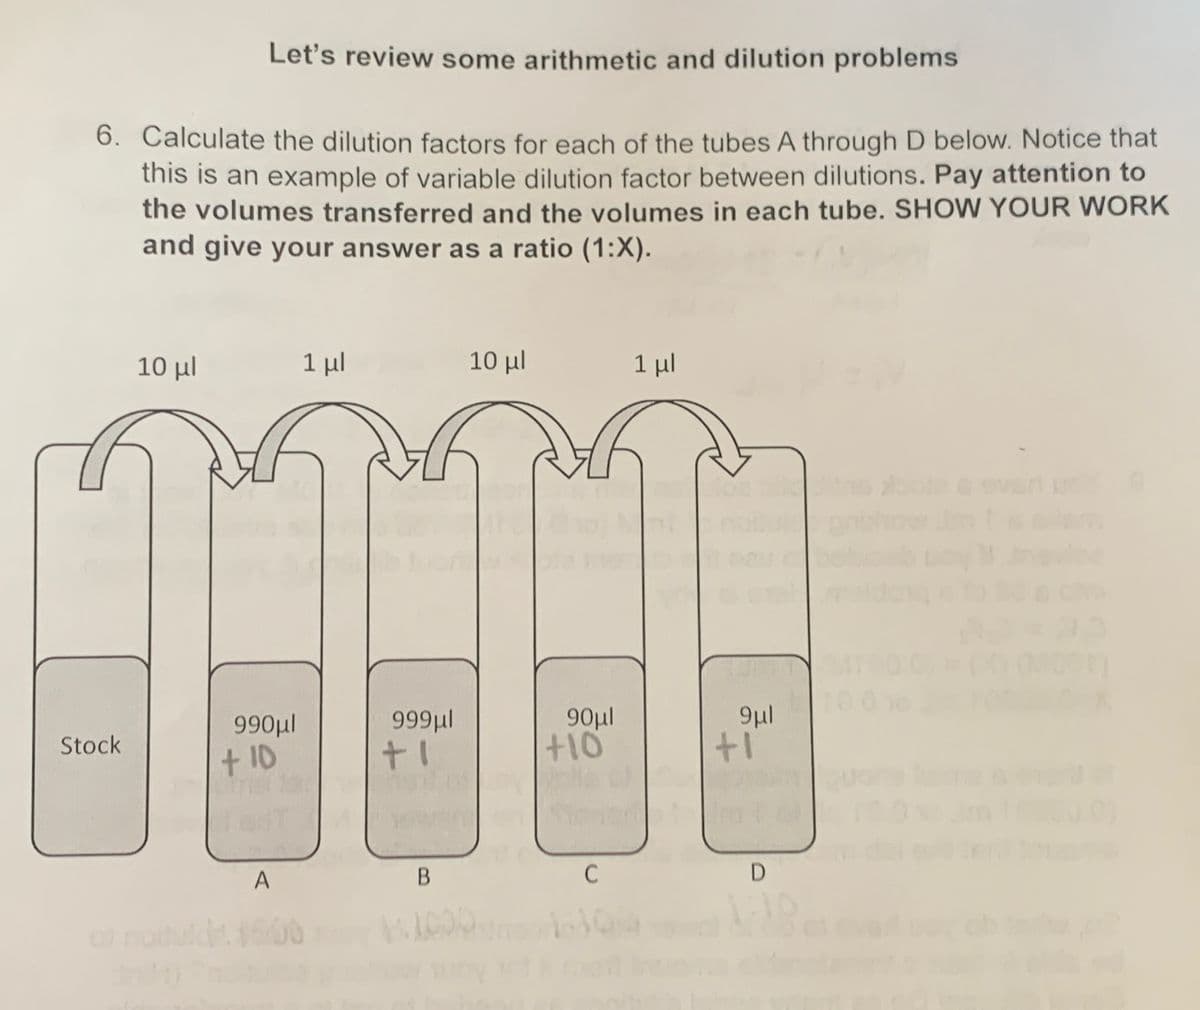 6. Calculate the dilution factors for each of the tubes A through D below. Notice that
this is an example of variable dilution factor between dilutions. Pay attention to
the volumes transferred and the volumes in each tube. SHOW YOUR WORK
and give your answer as a ratio (1:X).
Stock
10 μ.
Let's review some arithmetic and dilution problems
of noitu
990μl
+ 10
A
1 μl
999μl
+1
B
10 μ.
90μl
+10
C
1 μ.
Loe plic
9μl
+1
D